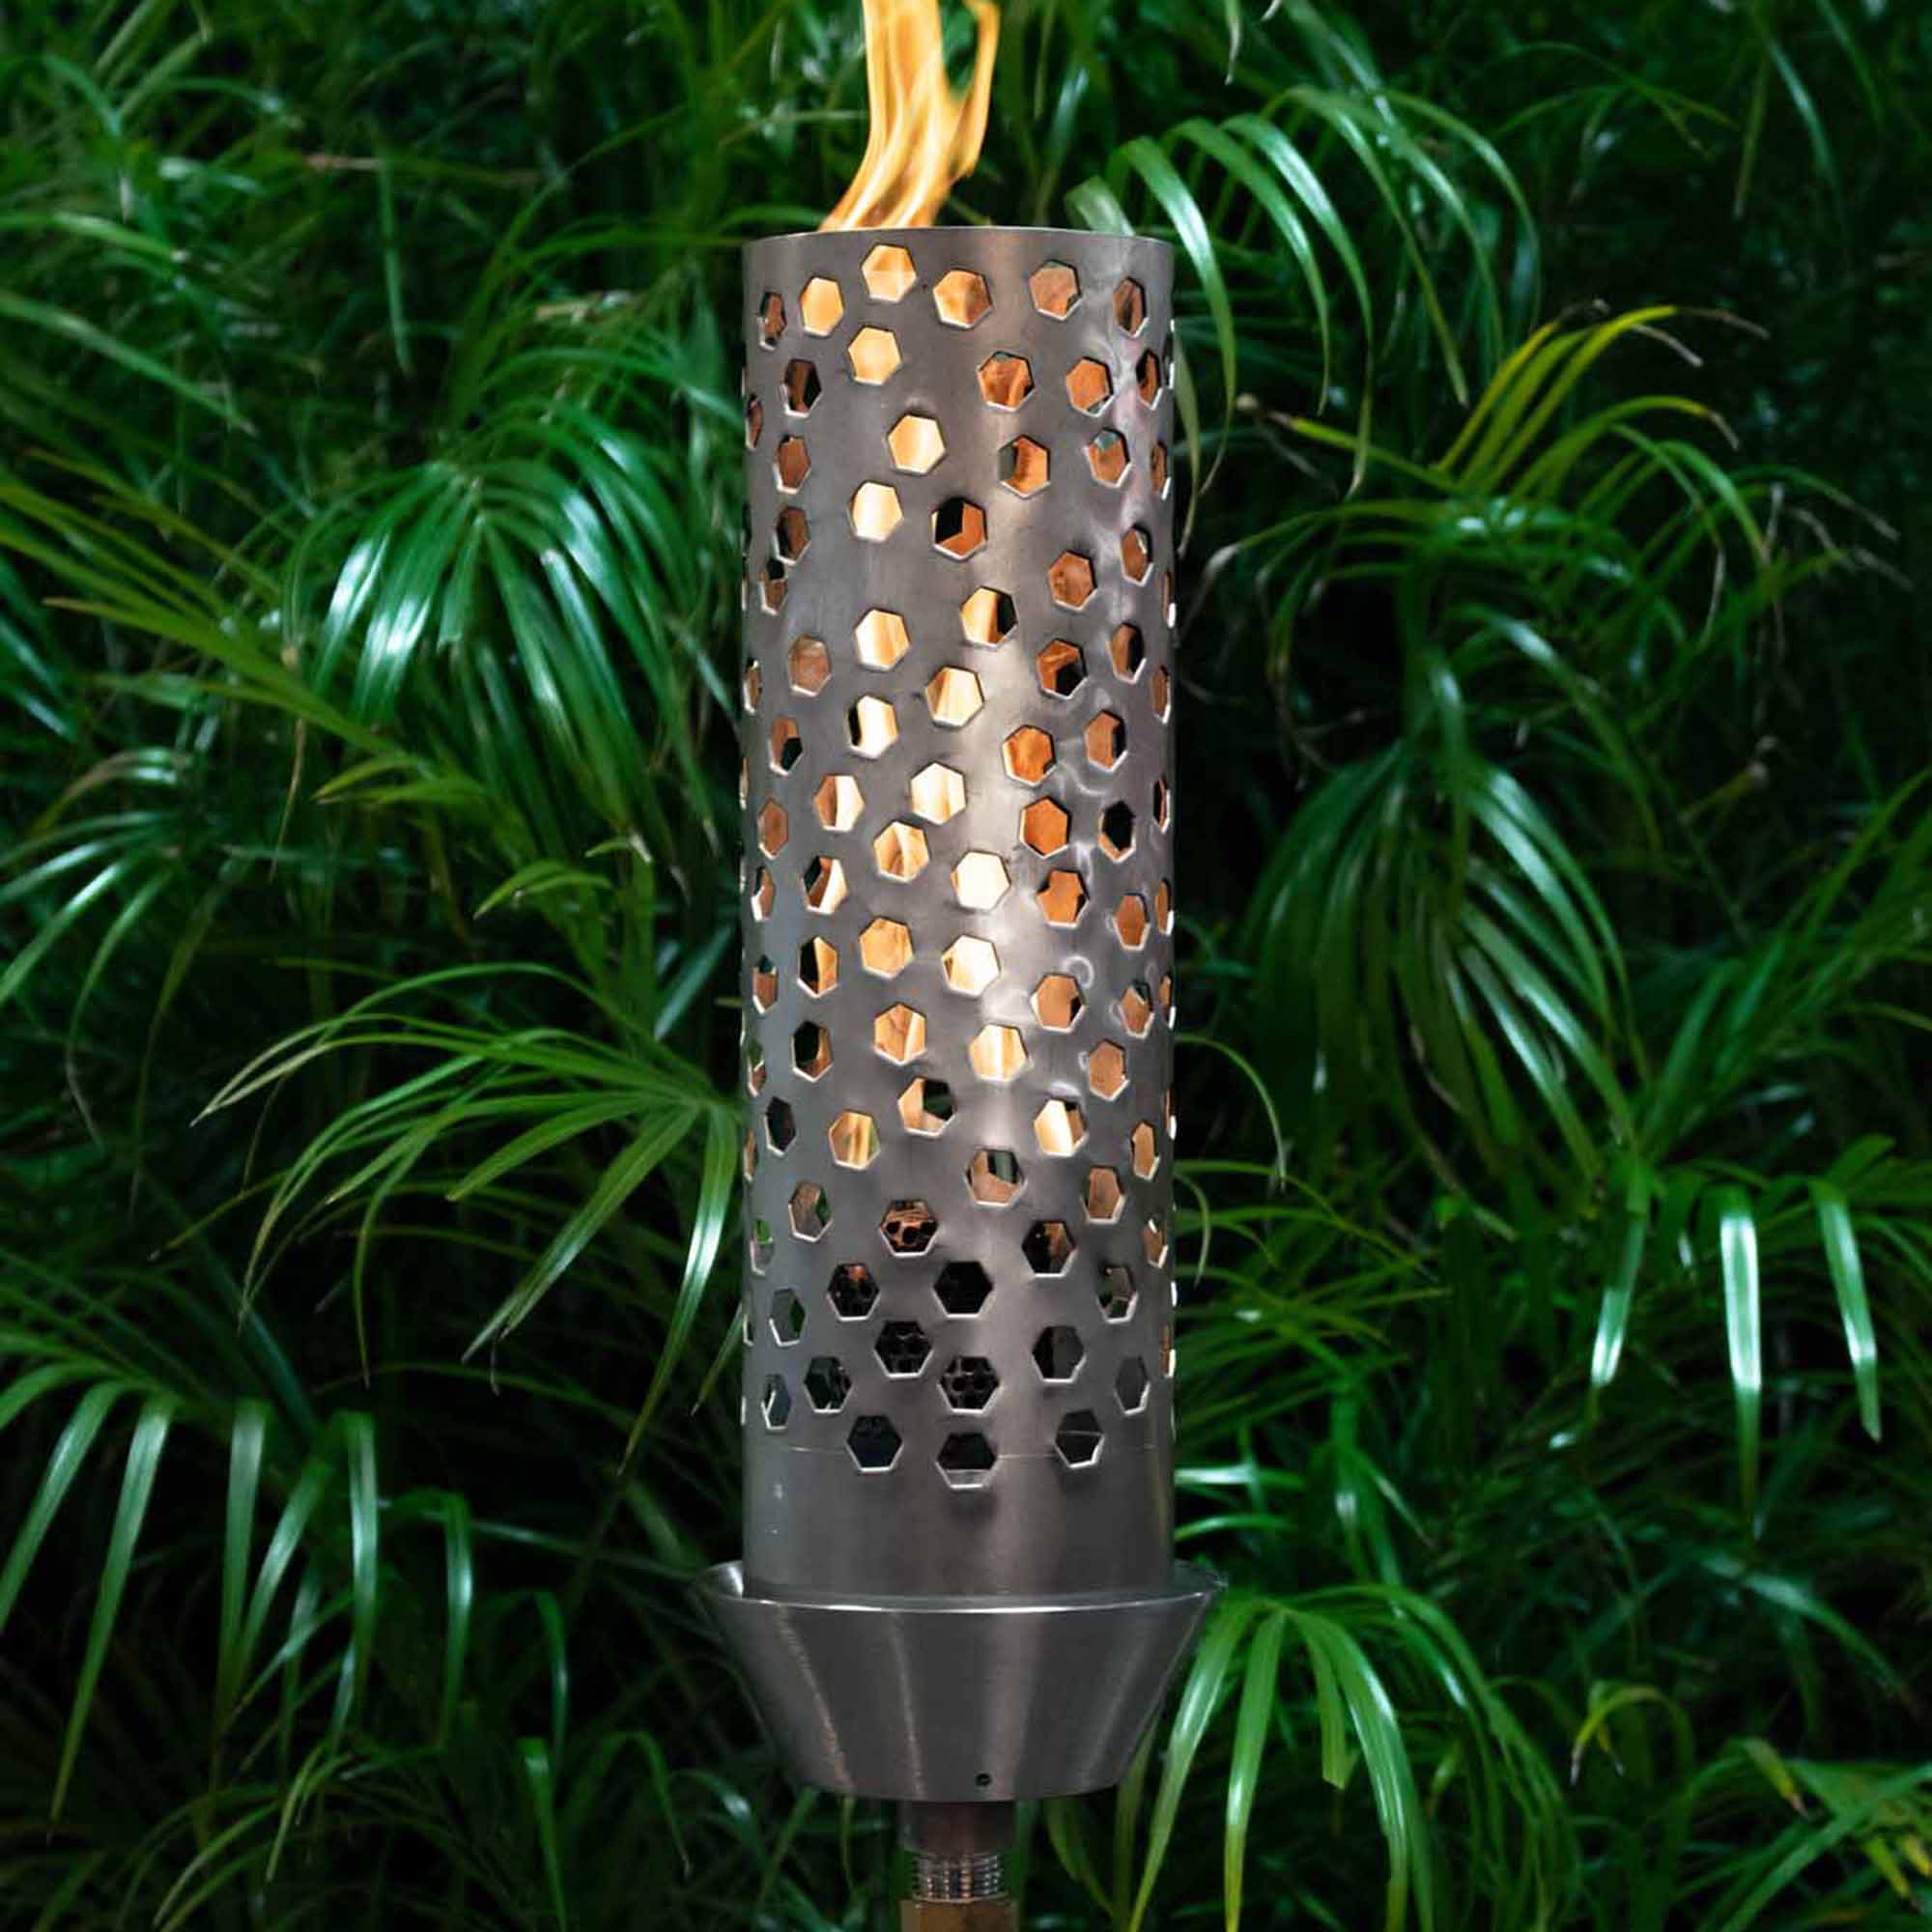 The Outdoor Plus 14" Honeycomb Stainless Steel Fire Torch Complete Set